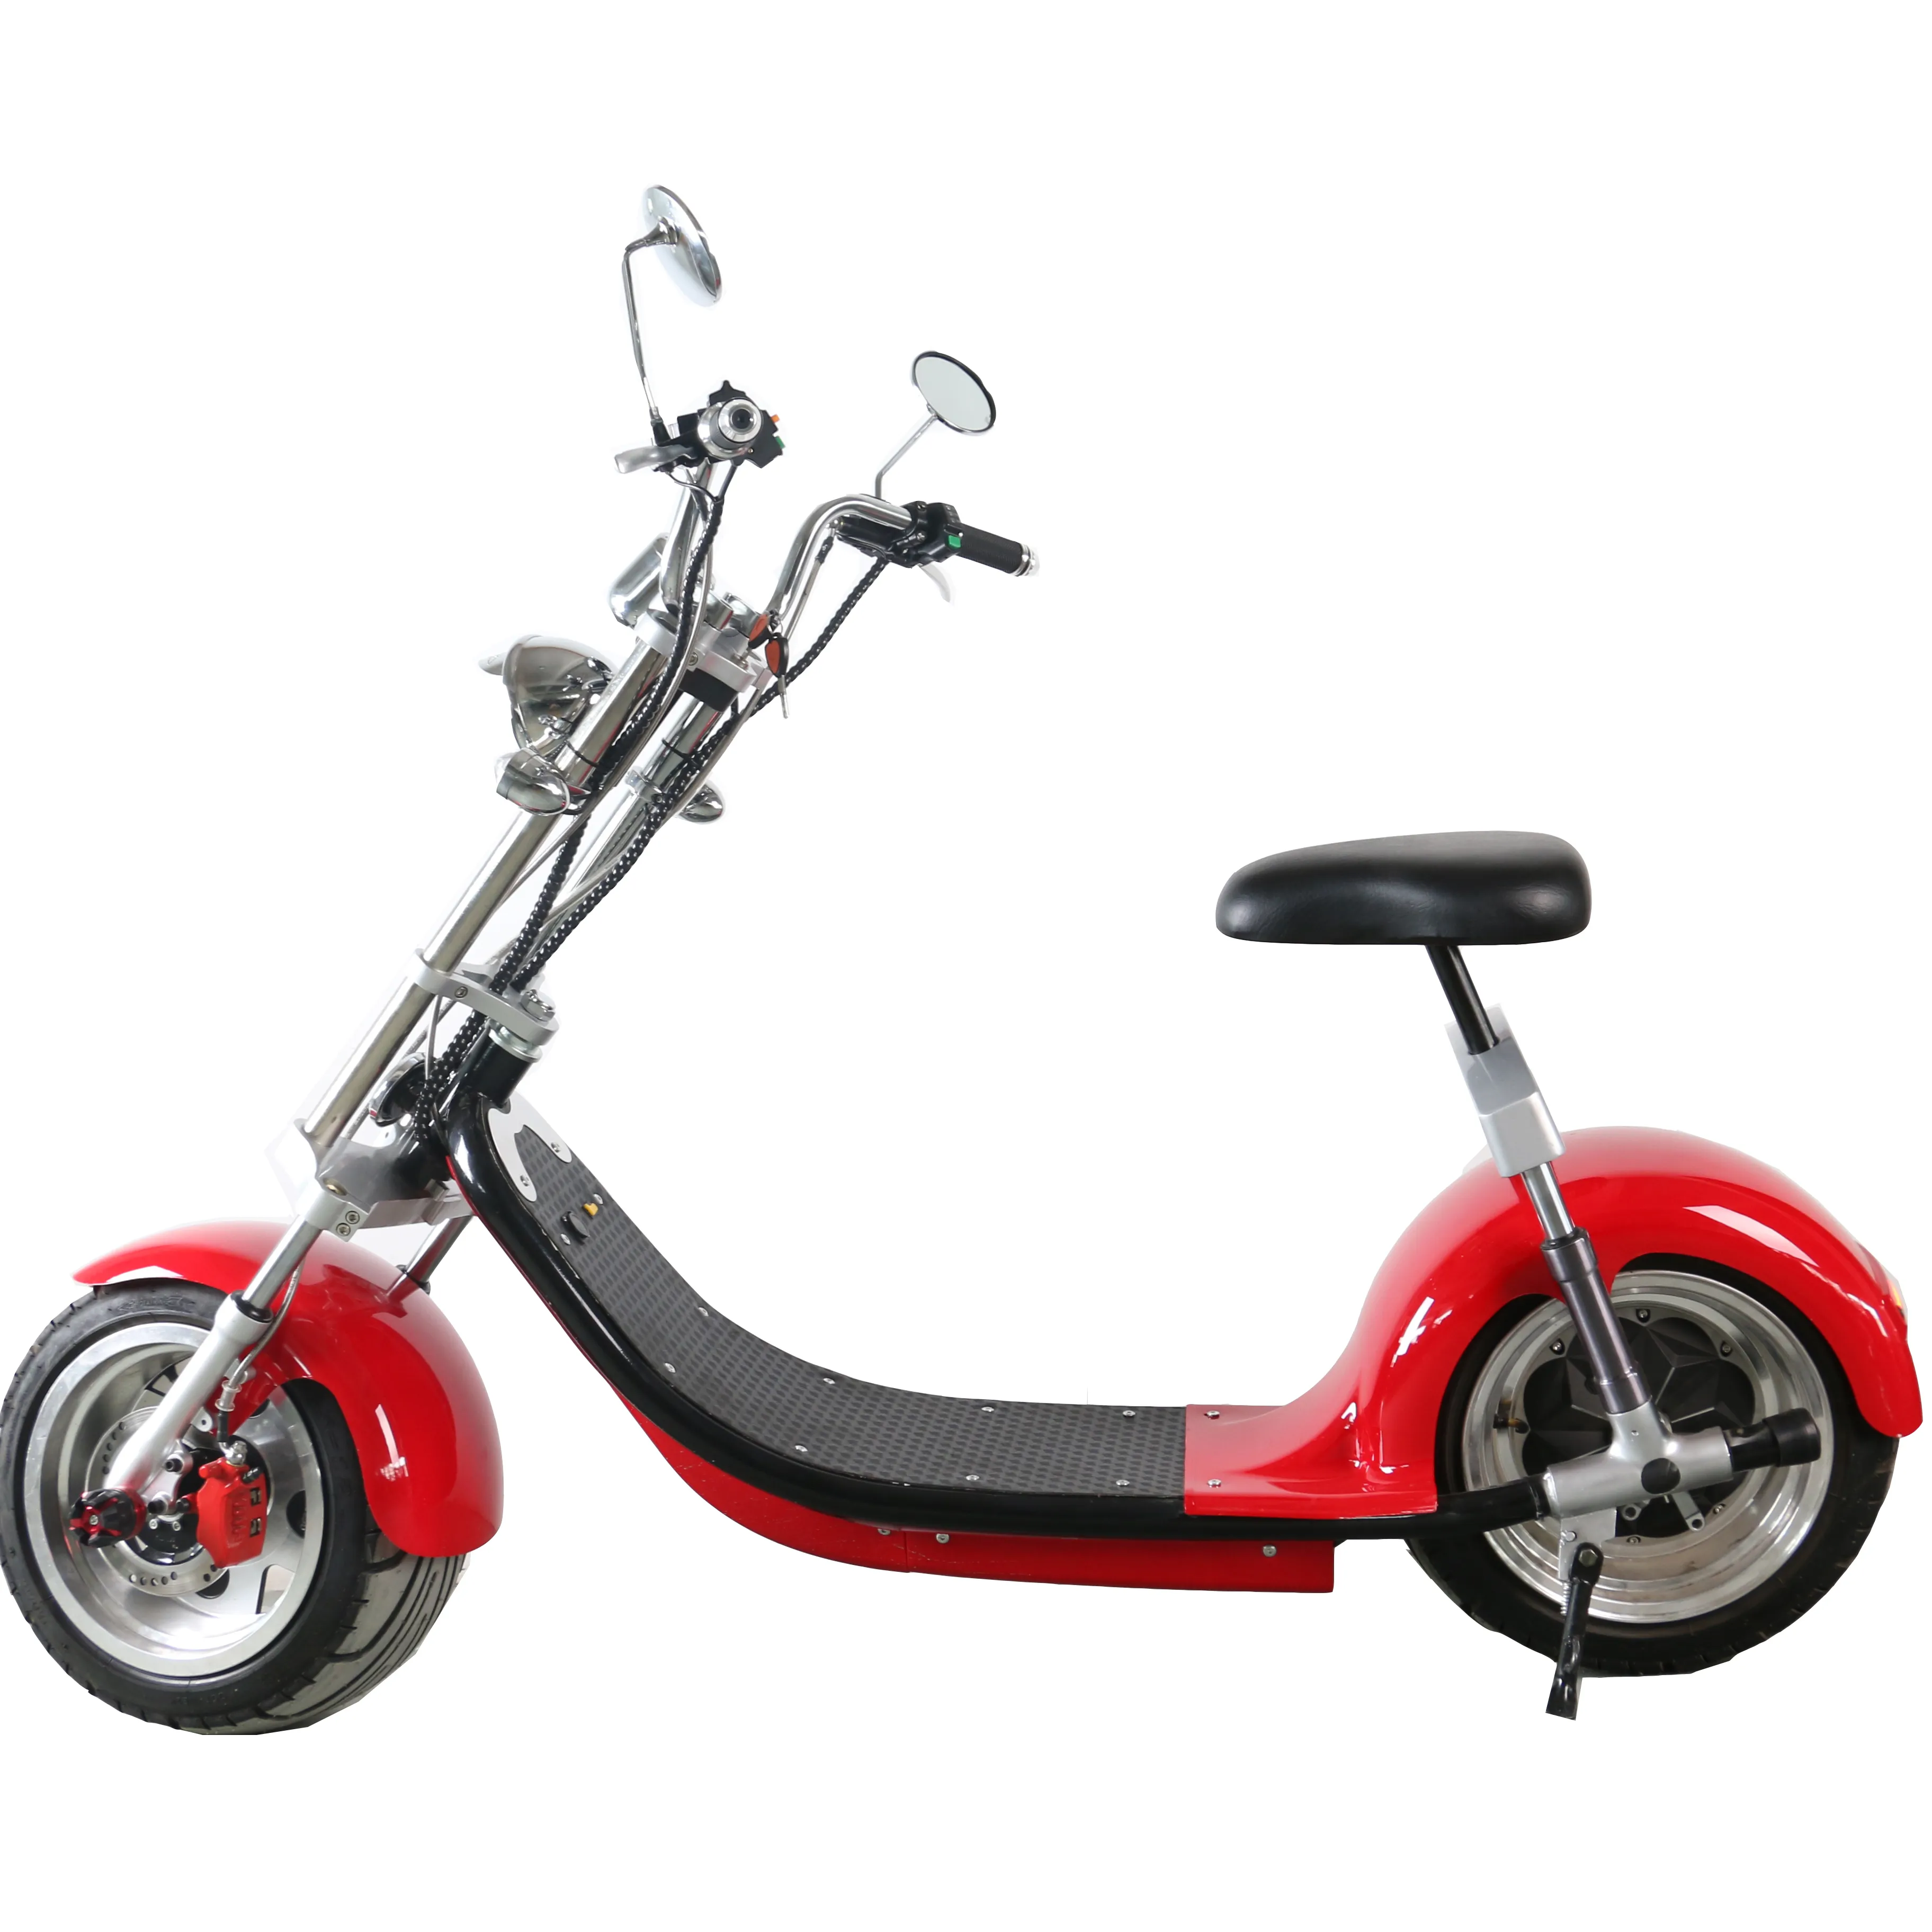 Toodi Newest electric motorcycle cheap price Chinese electric citycoco scooter